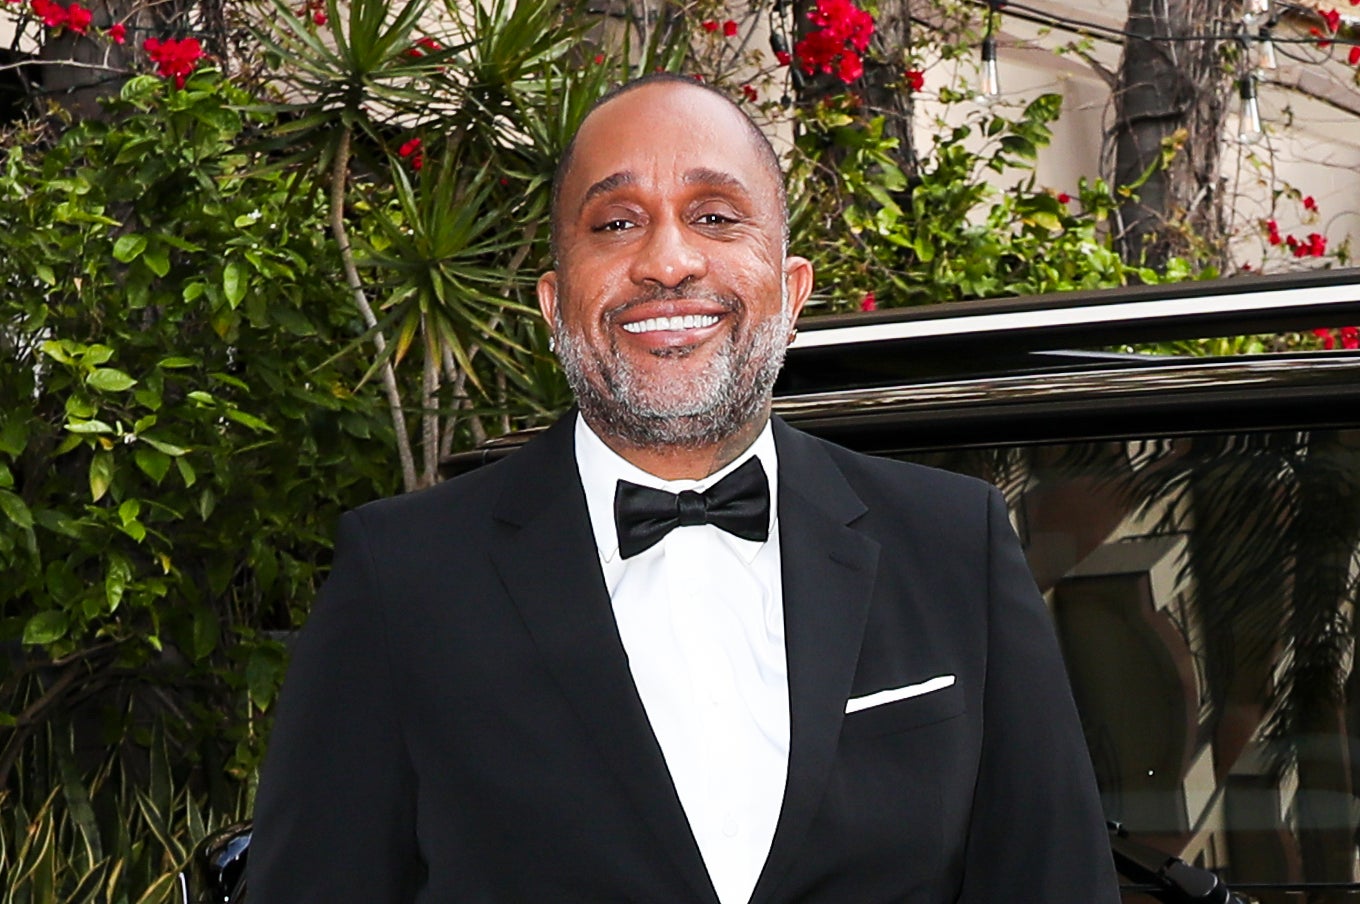 EXCLUSIVE: Kenya Barris On Who's Getting Cast For His Upcoming 'Wizard Of Oz' Re-Make